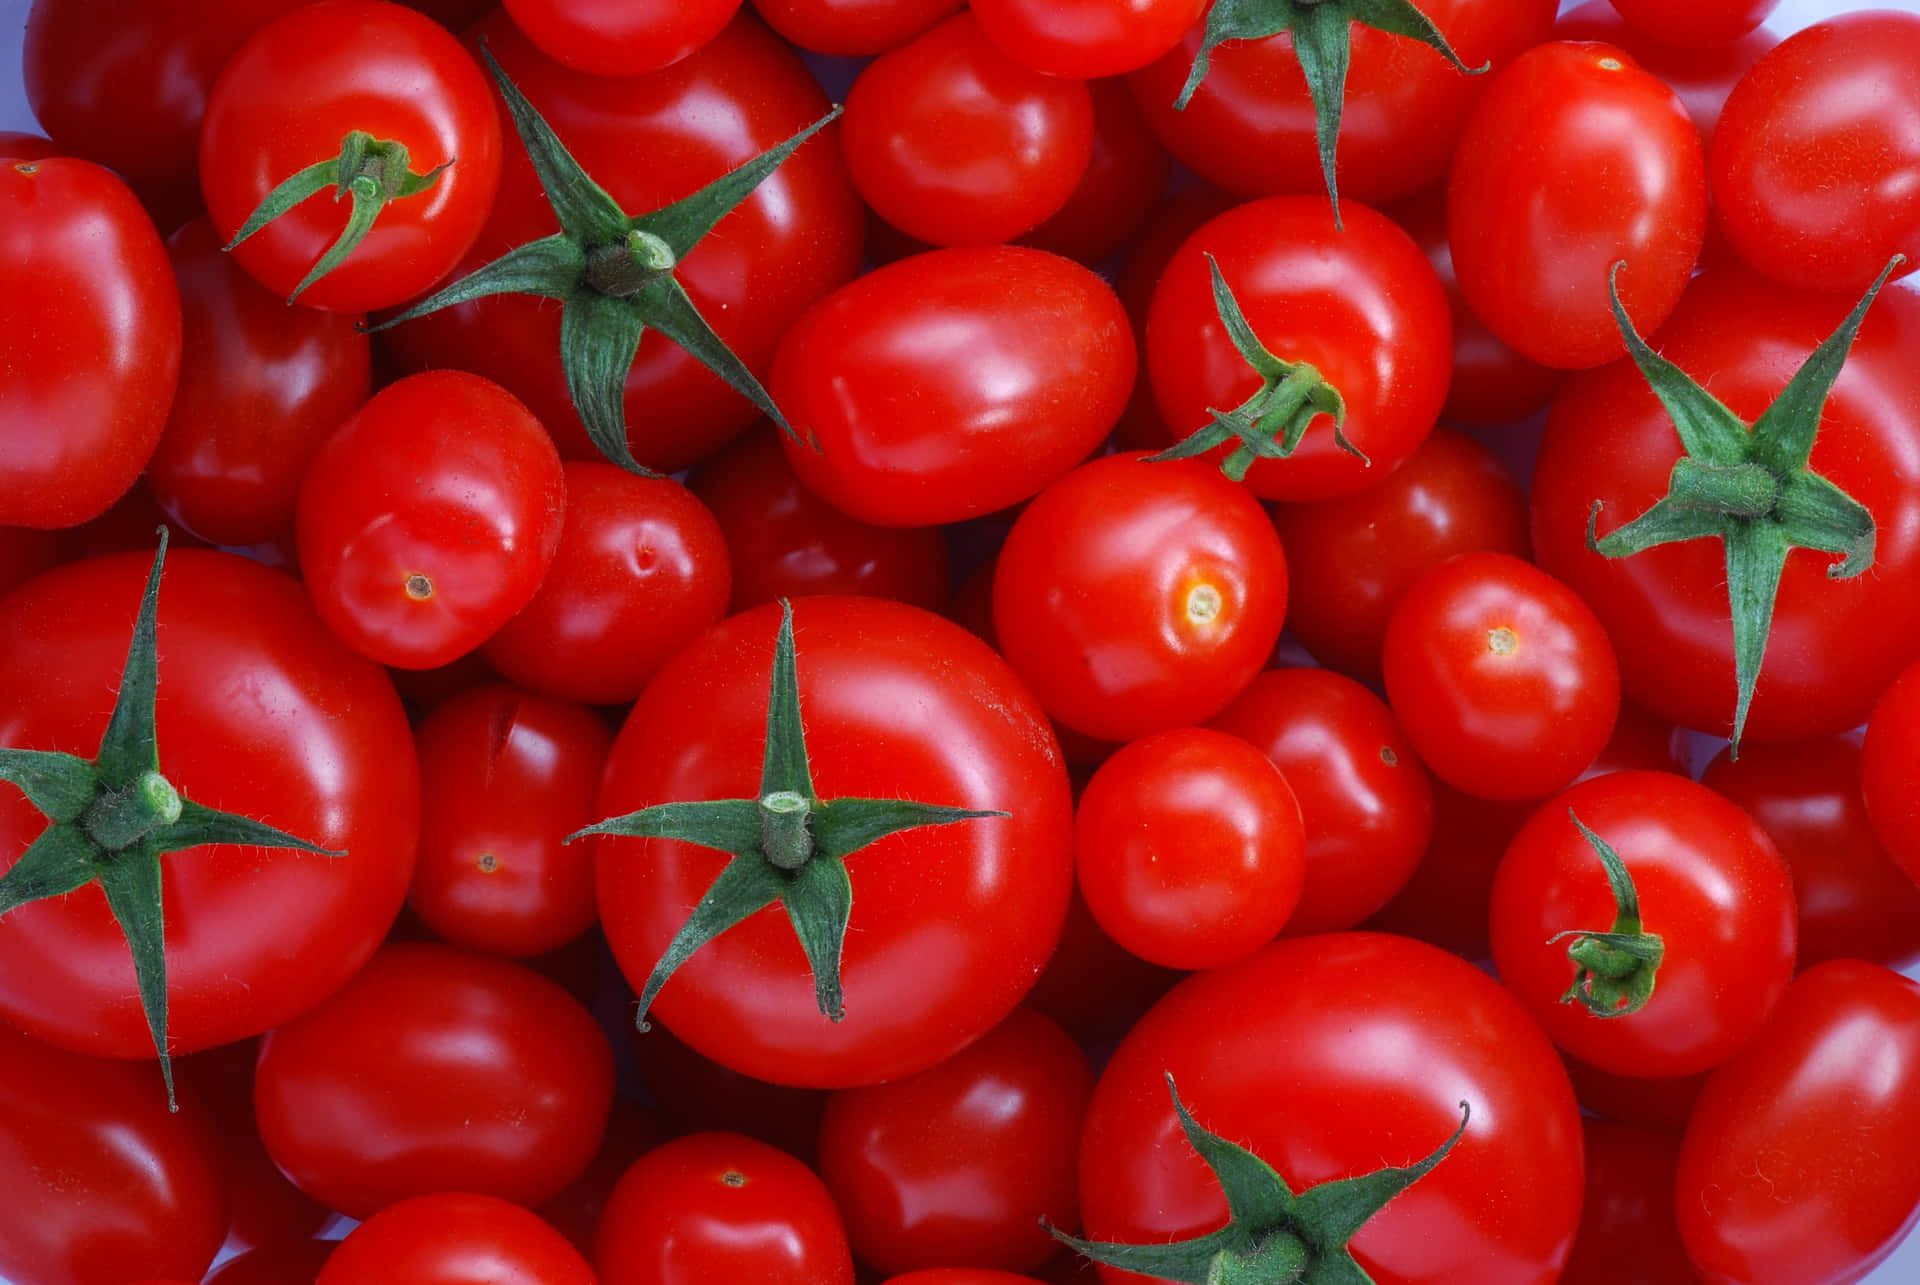 Enjoy the juicy taste of a ripe red tomato